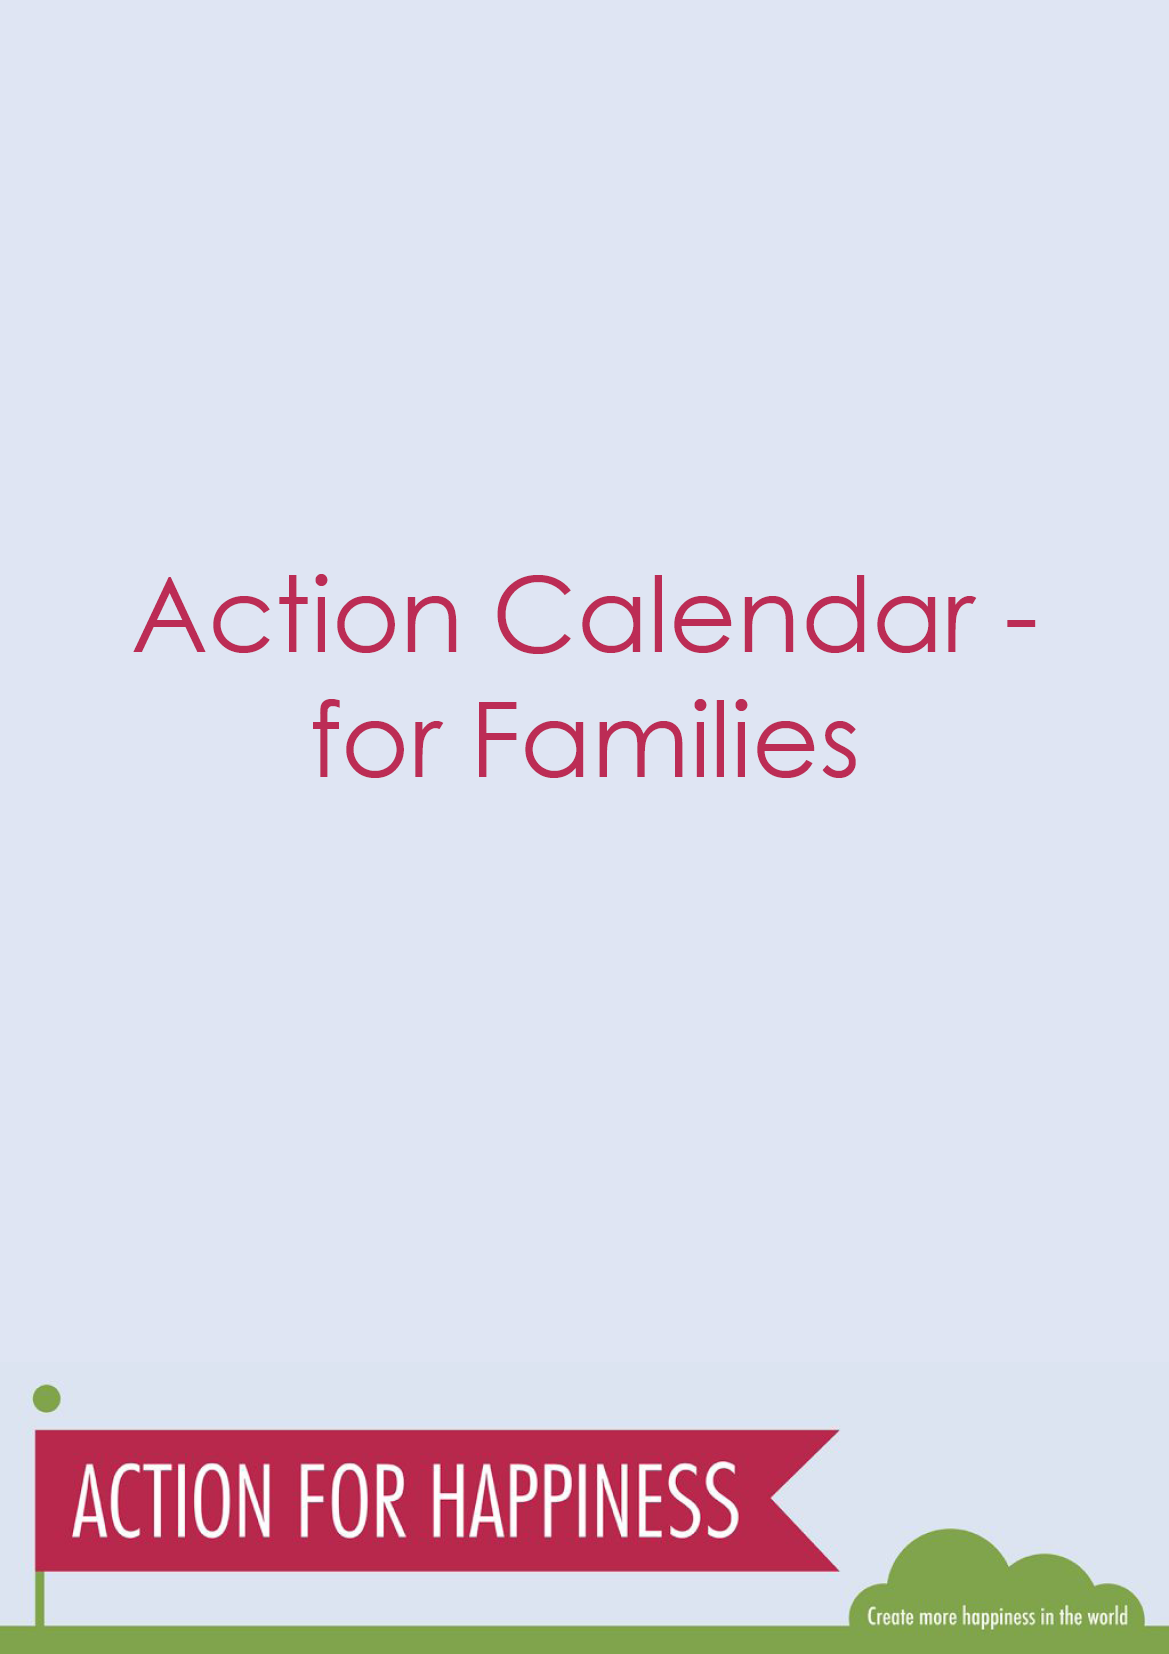 Wellbeing Actions for Families